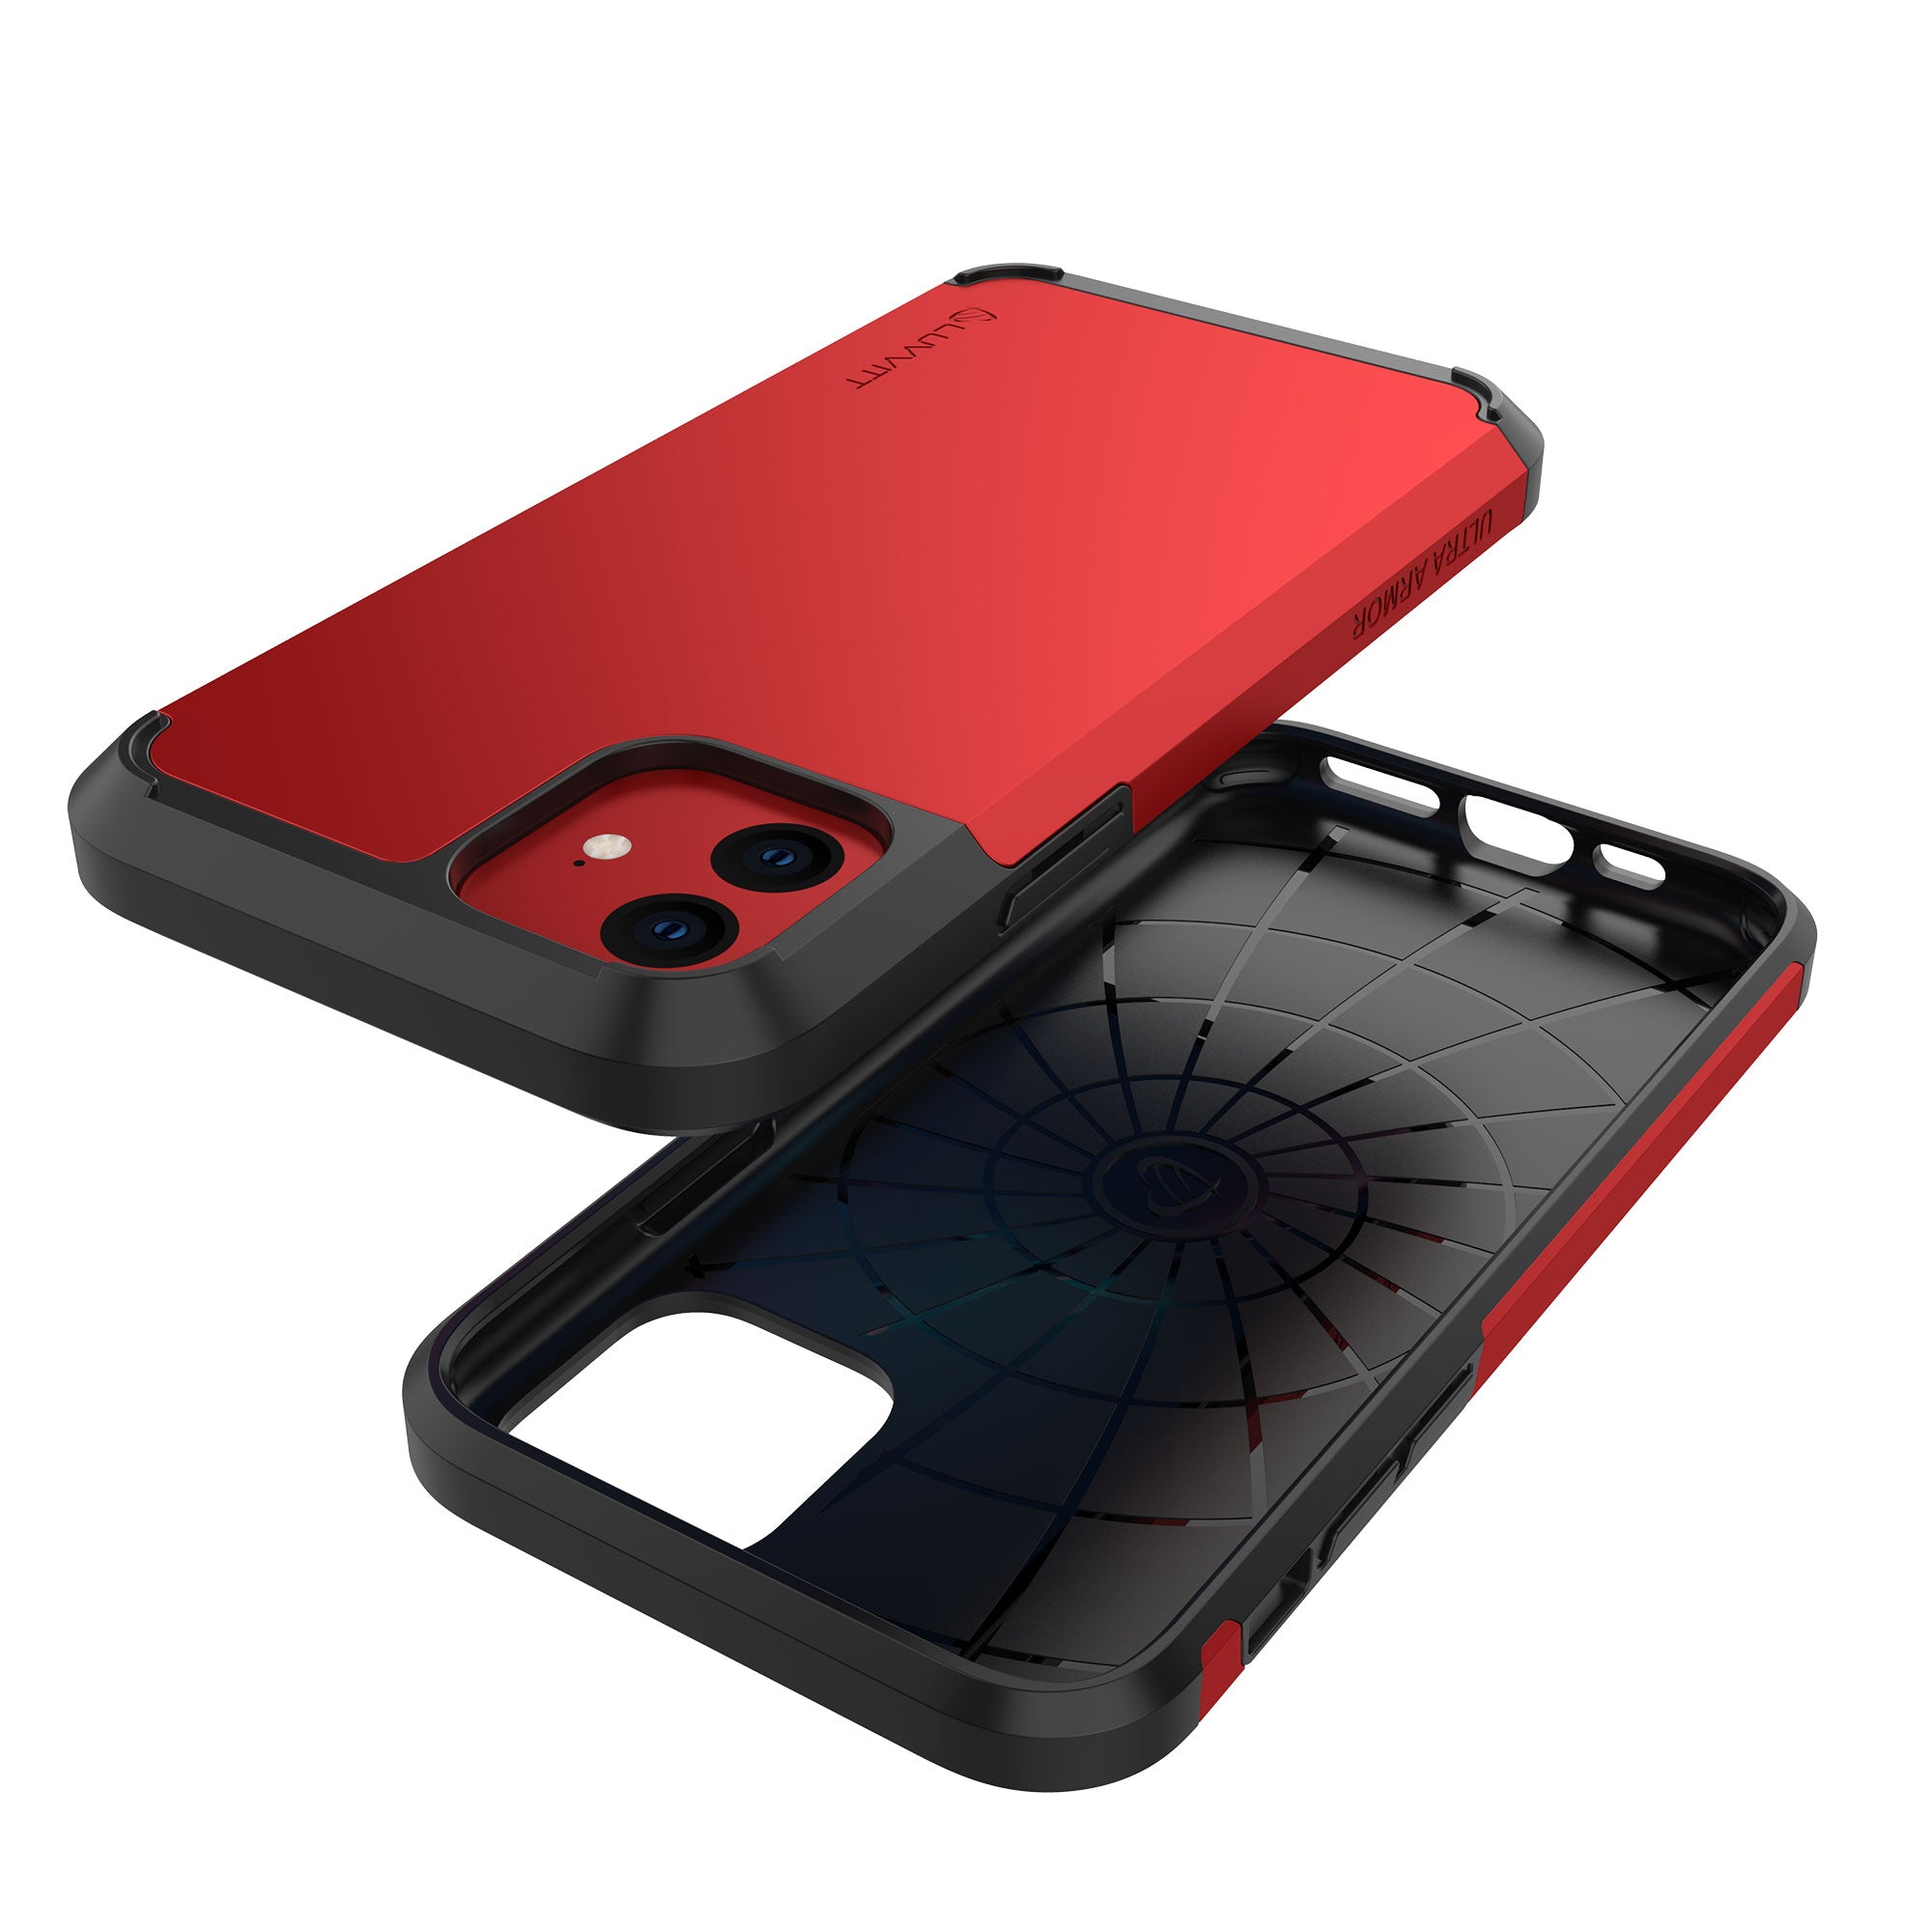 Luvvitt Ultra Armor Dual Layer Heavy Duty Case for iPhone 11 2019 - Red